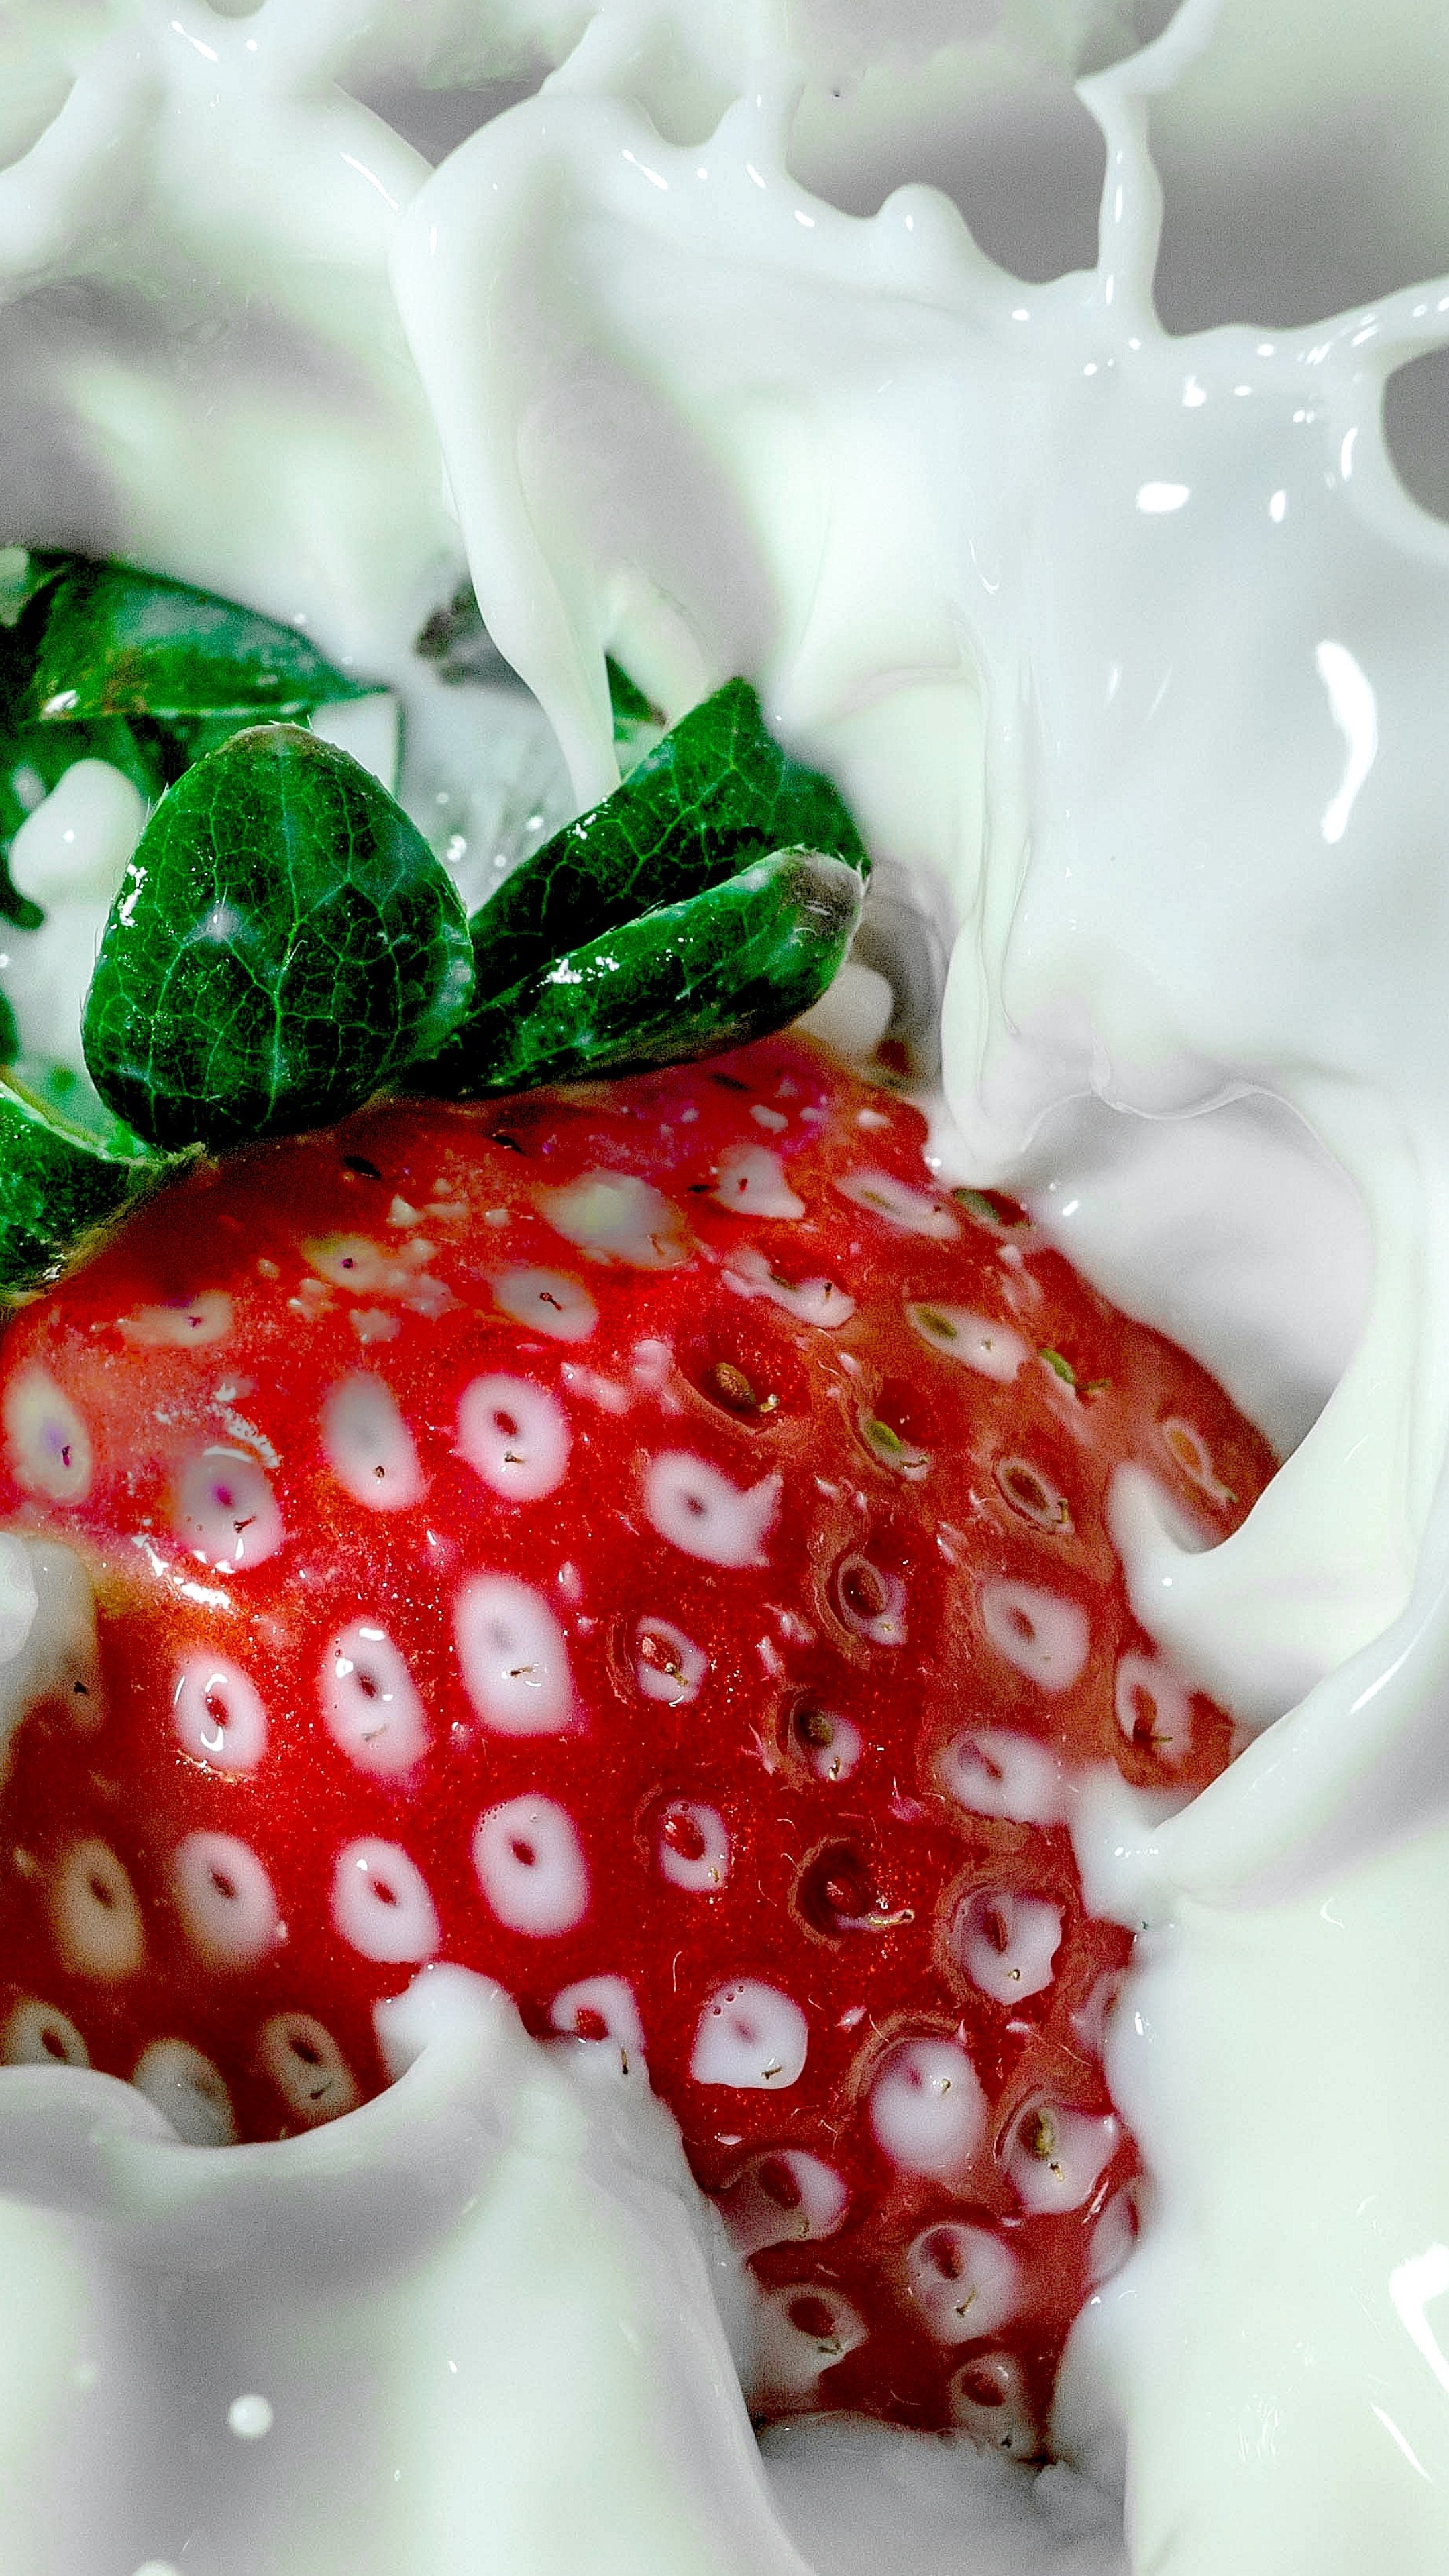 Milk: Strawberry, Contains protein and lactose, Liquid. 2160x3840 4K Wallpaper.